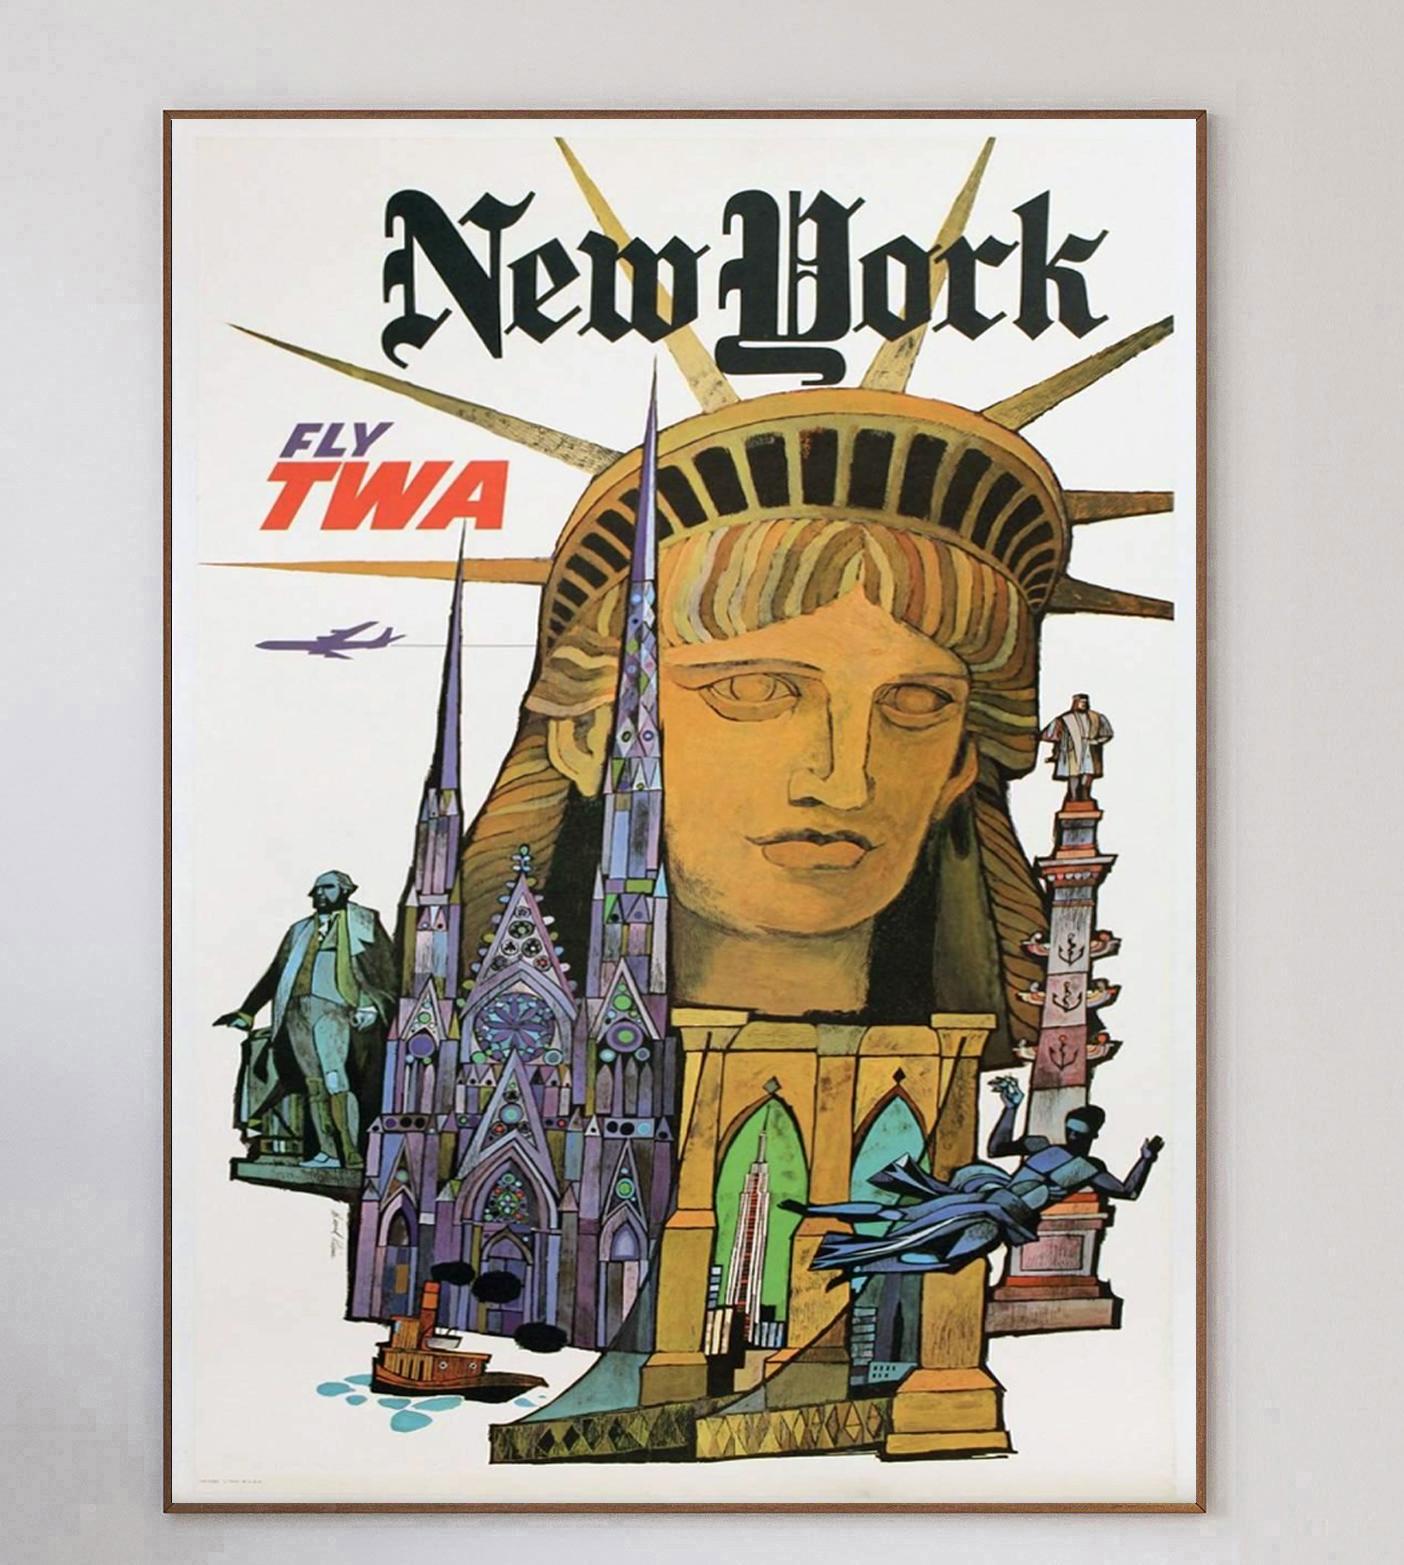 This poster was created in 1960 for Howard Hughes’ Trans World Airlines promoting their routes to New York. Illustrated by influential American artist David Klein, this design features a wonderfully stylized view of the New York City highlights